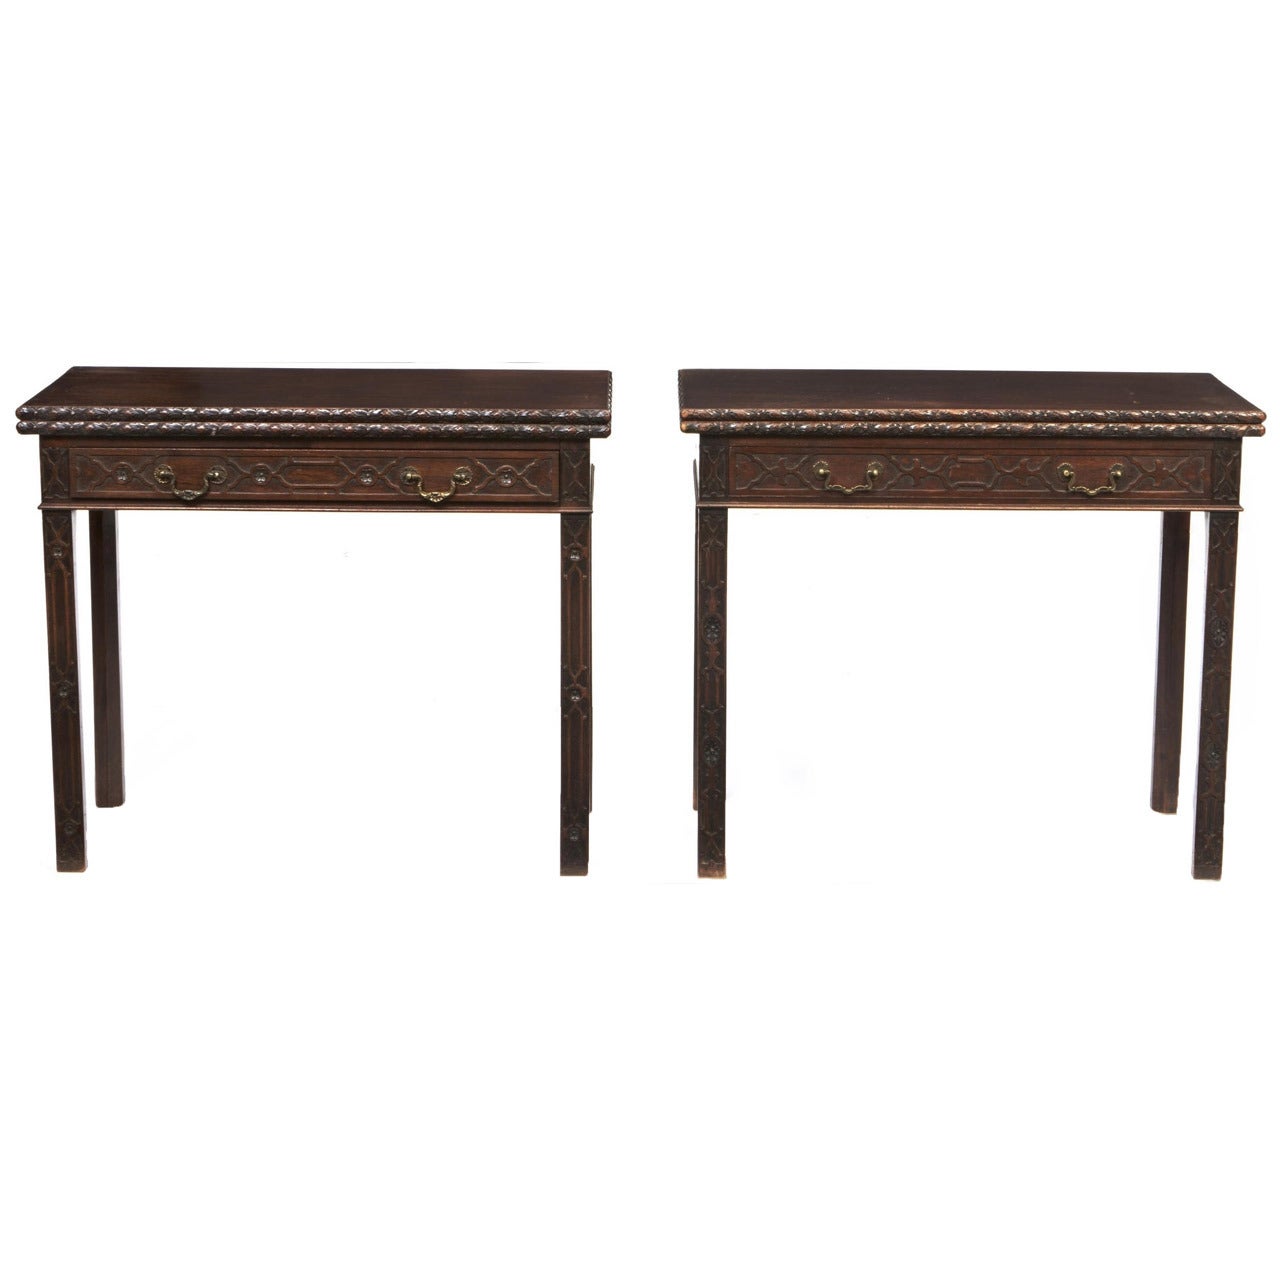 Near Pair of 19th Century Chippendale Style Mahogany Tea Tables